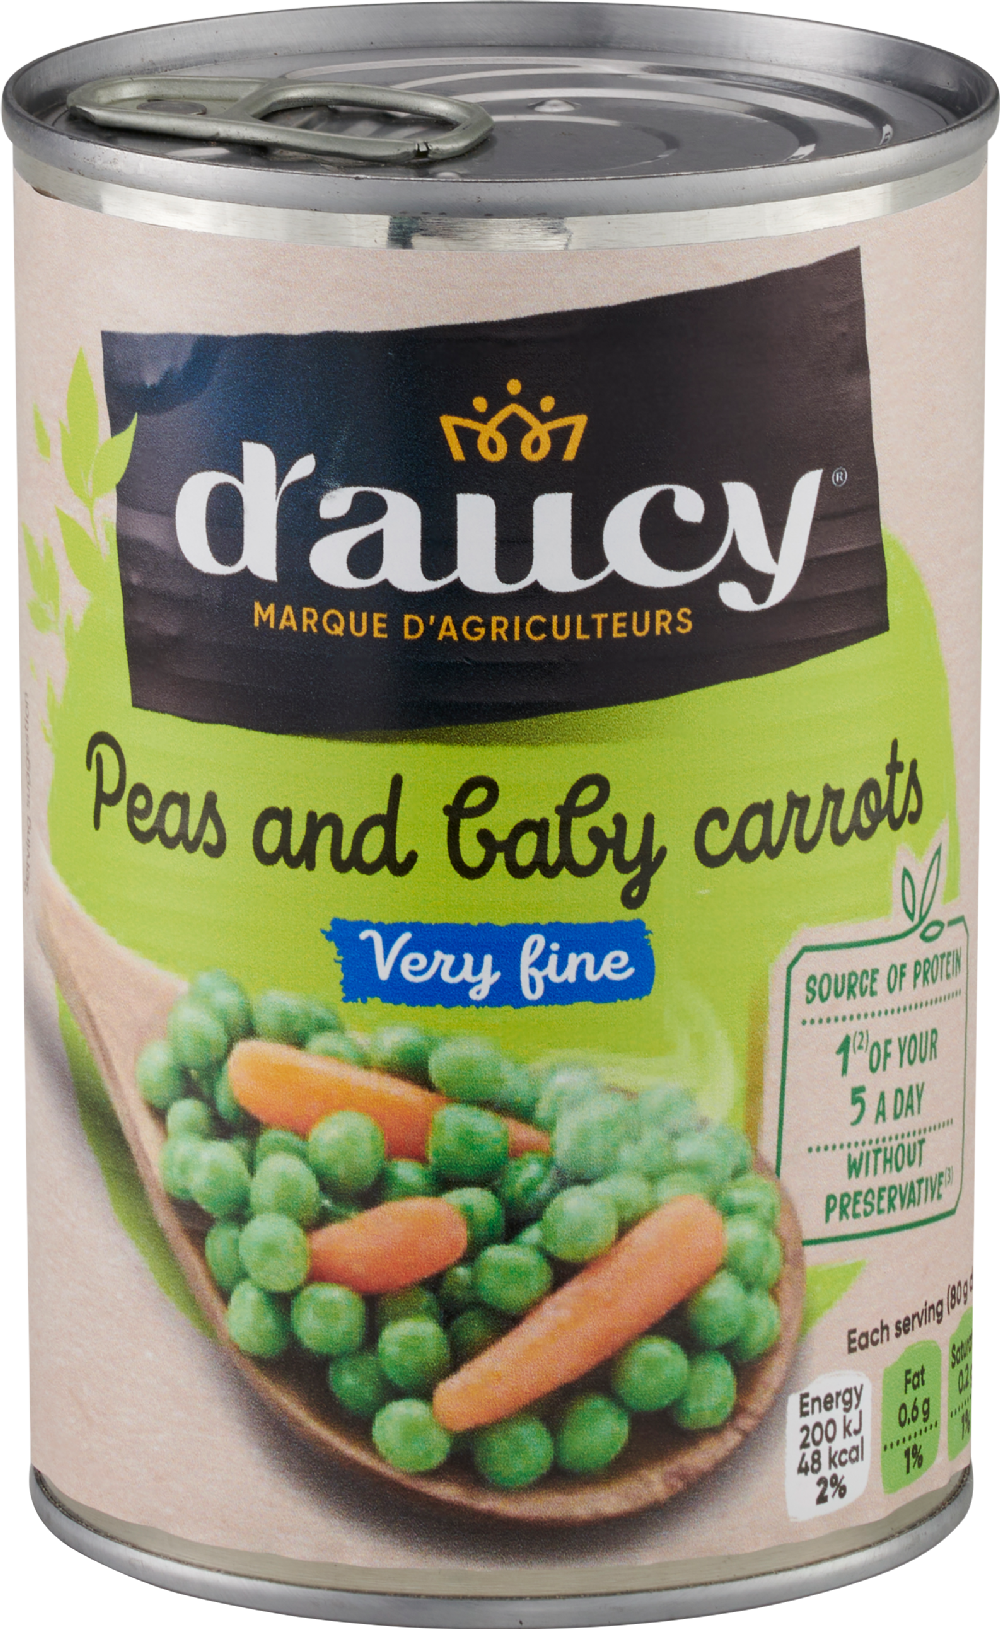 D'AUCY Peas and Baby Carrots - Very Fine 400g